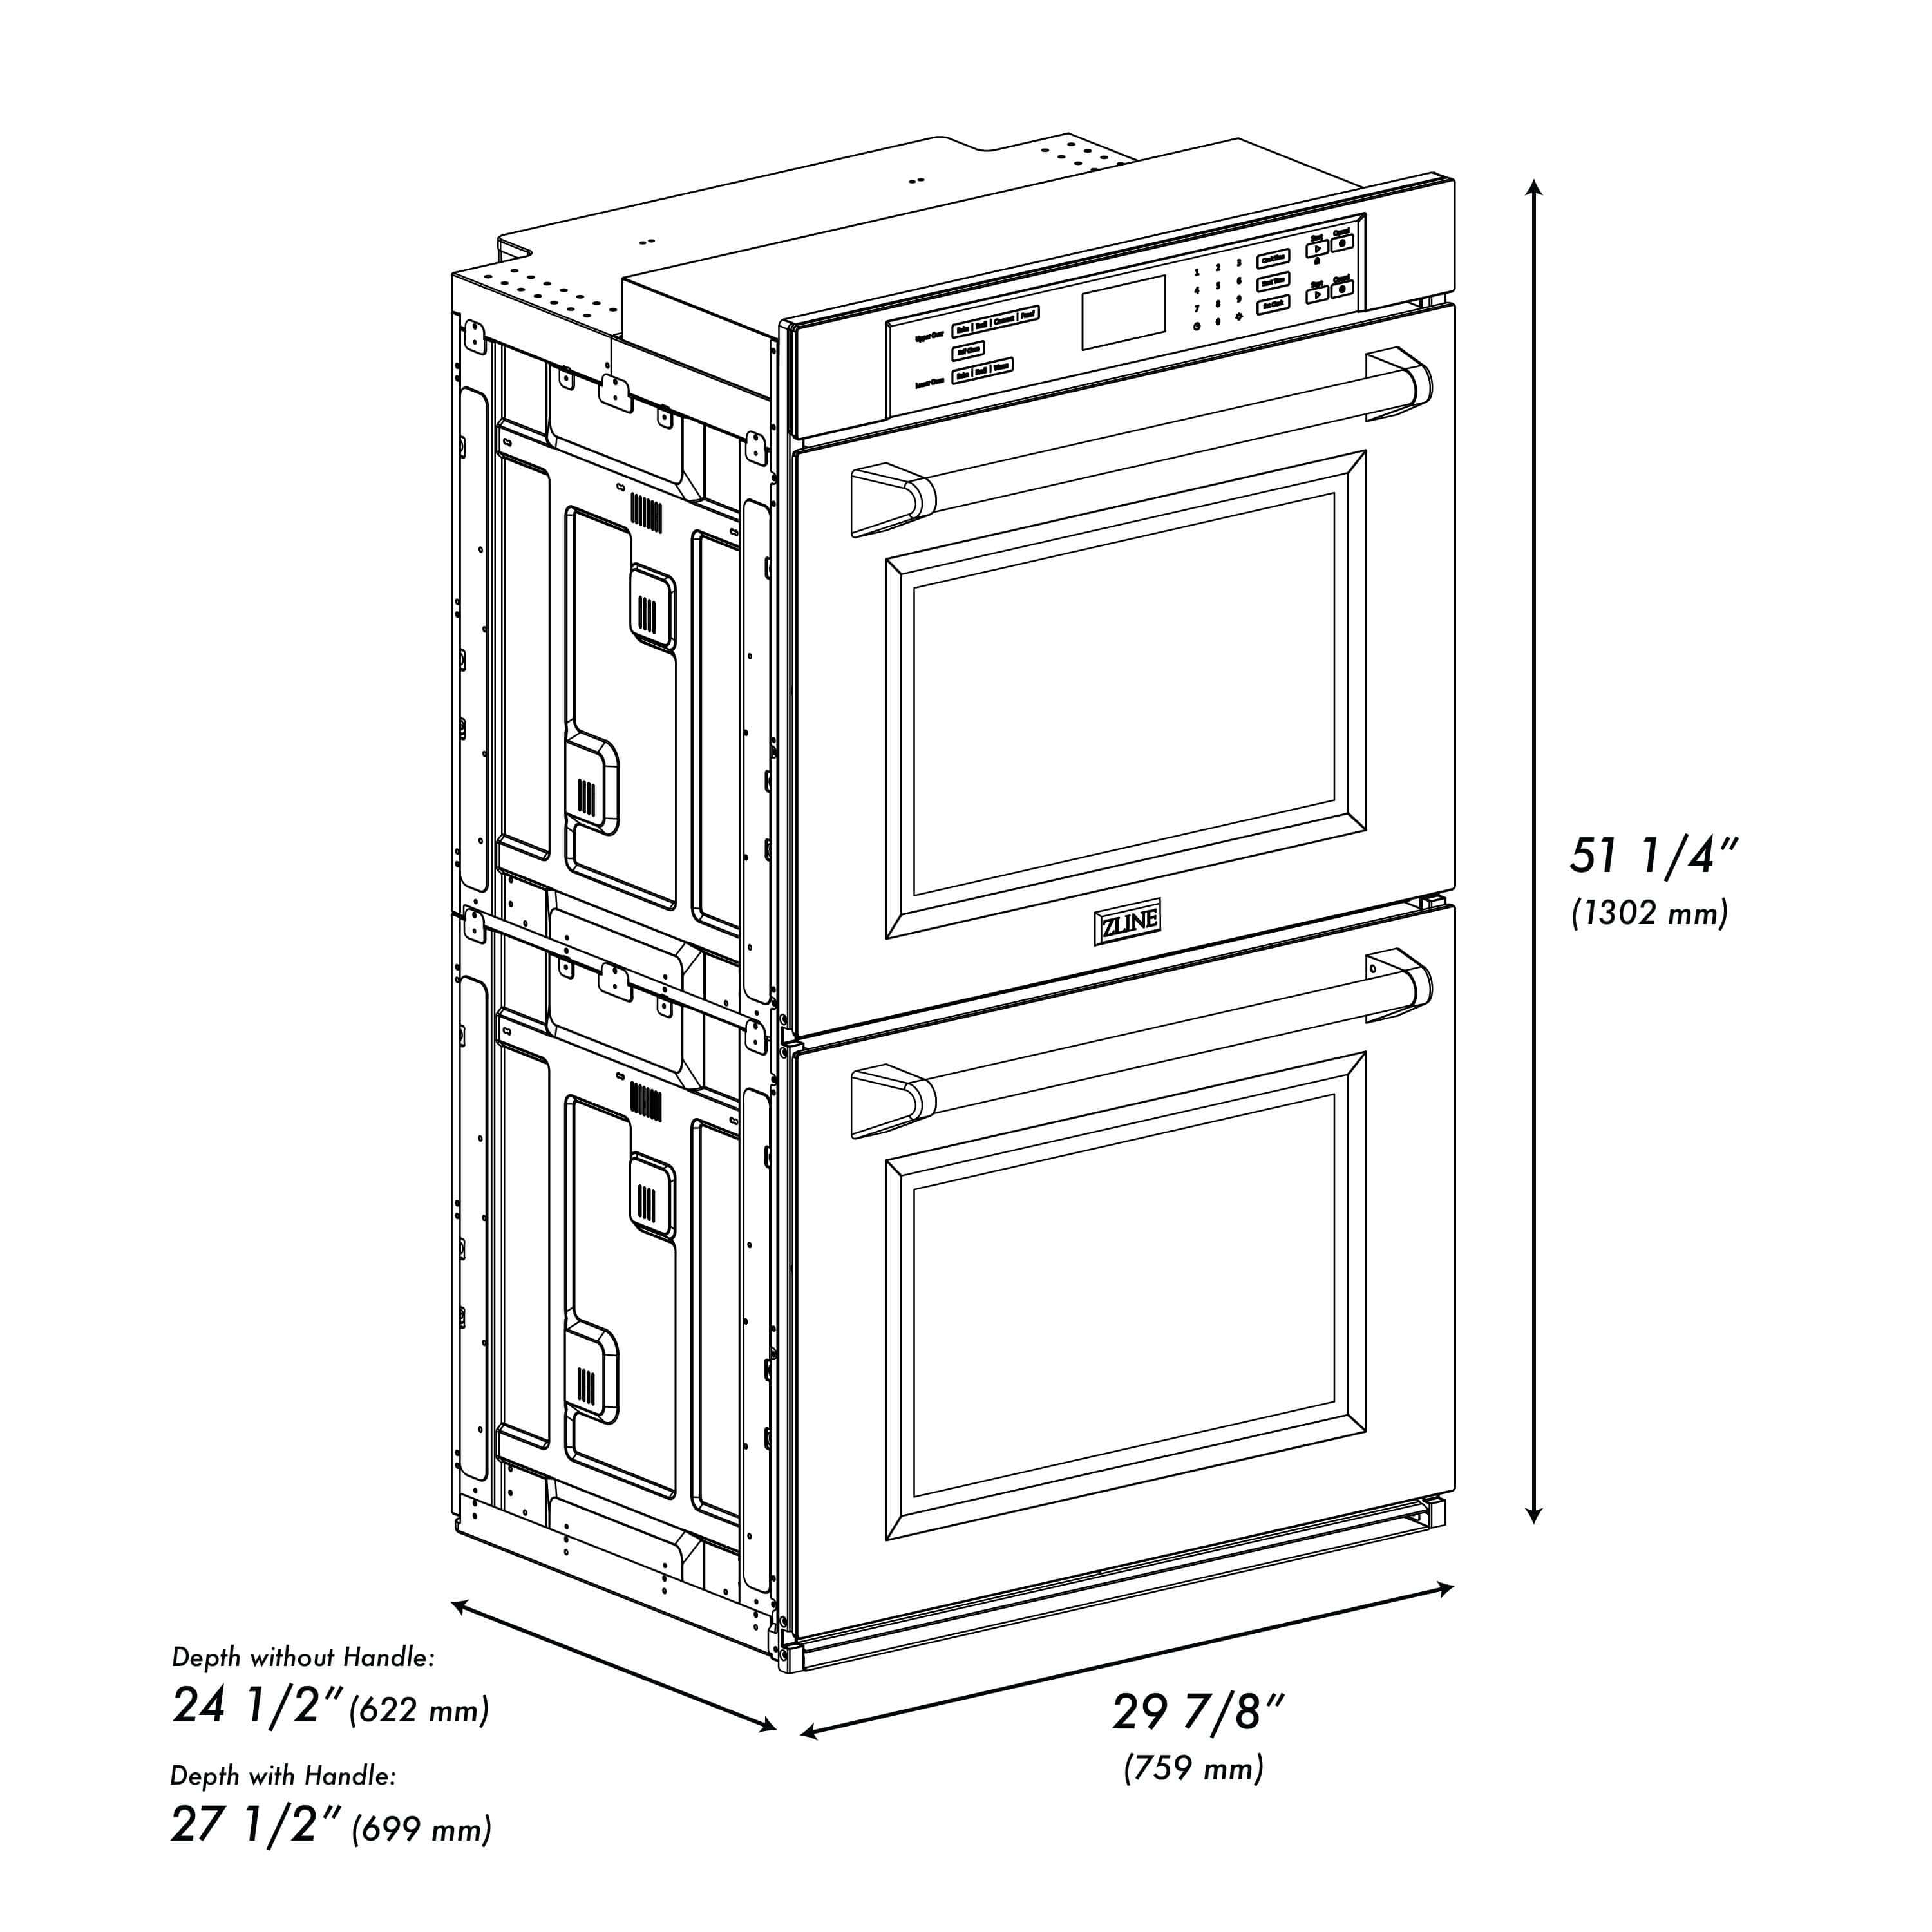 ZLINE Double Wall Oven (AWD-30) dimensional graphic with measurements.